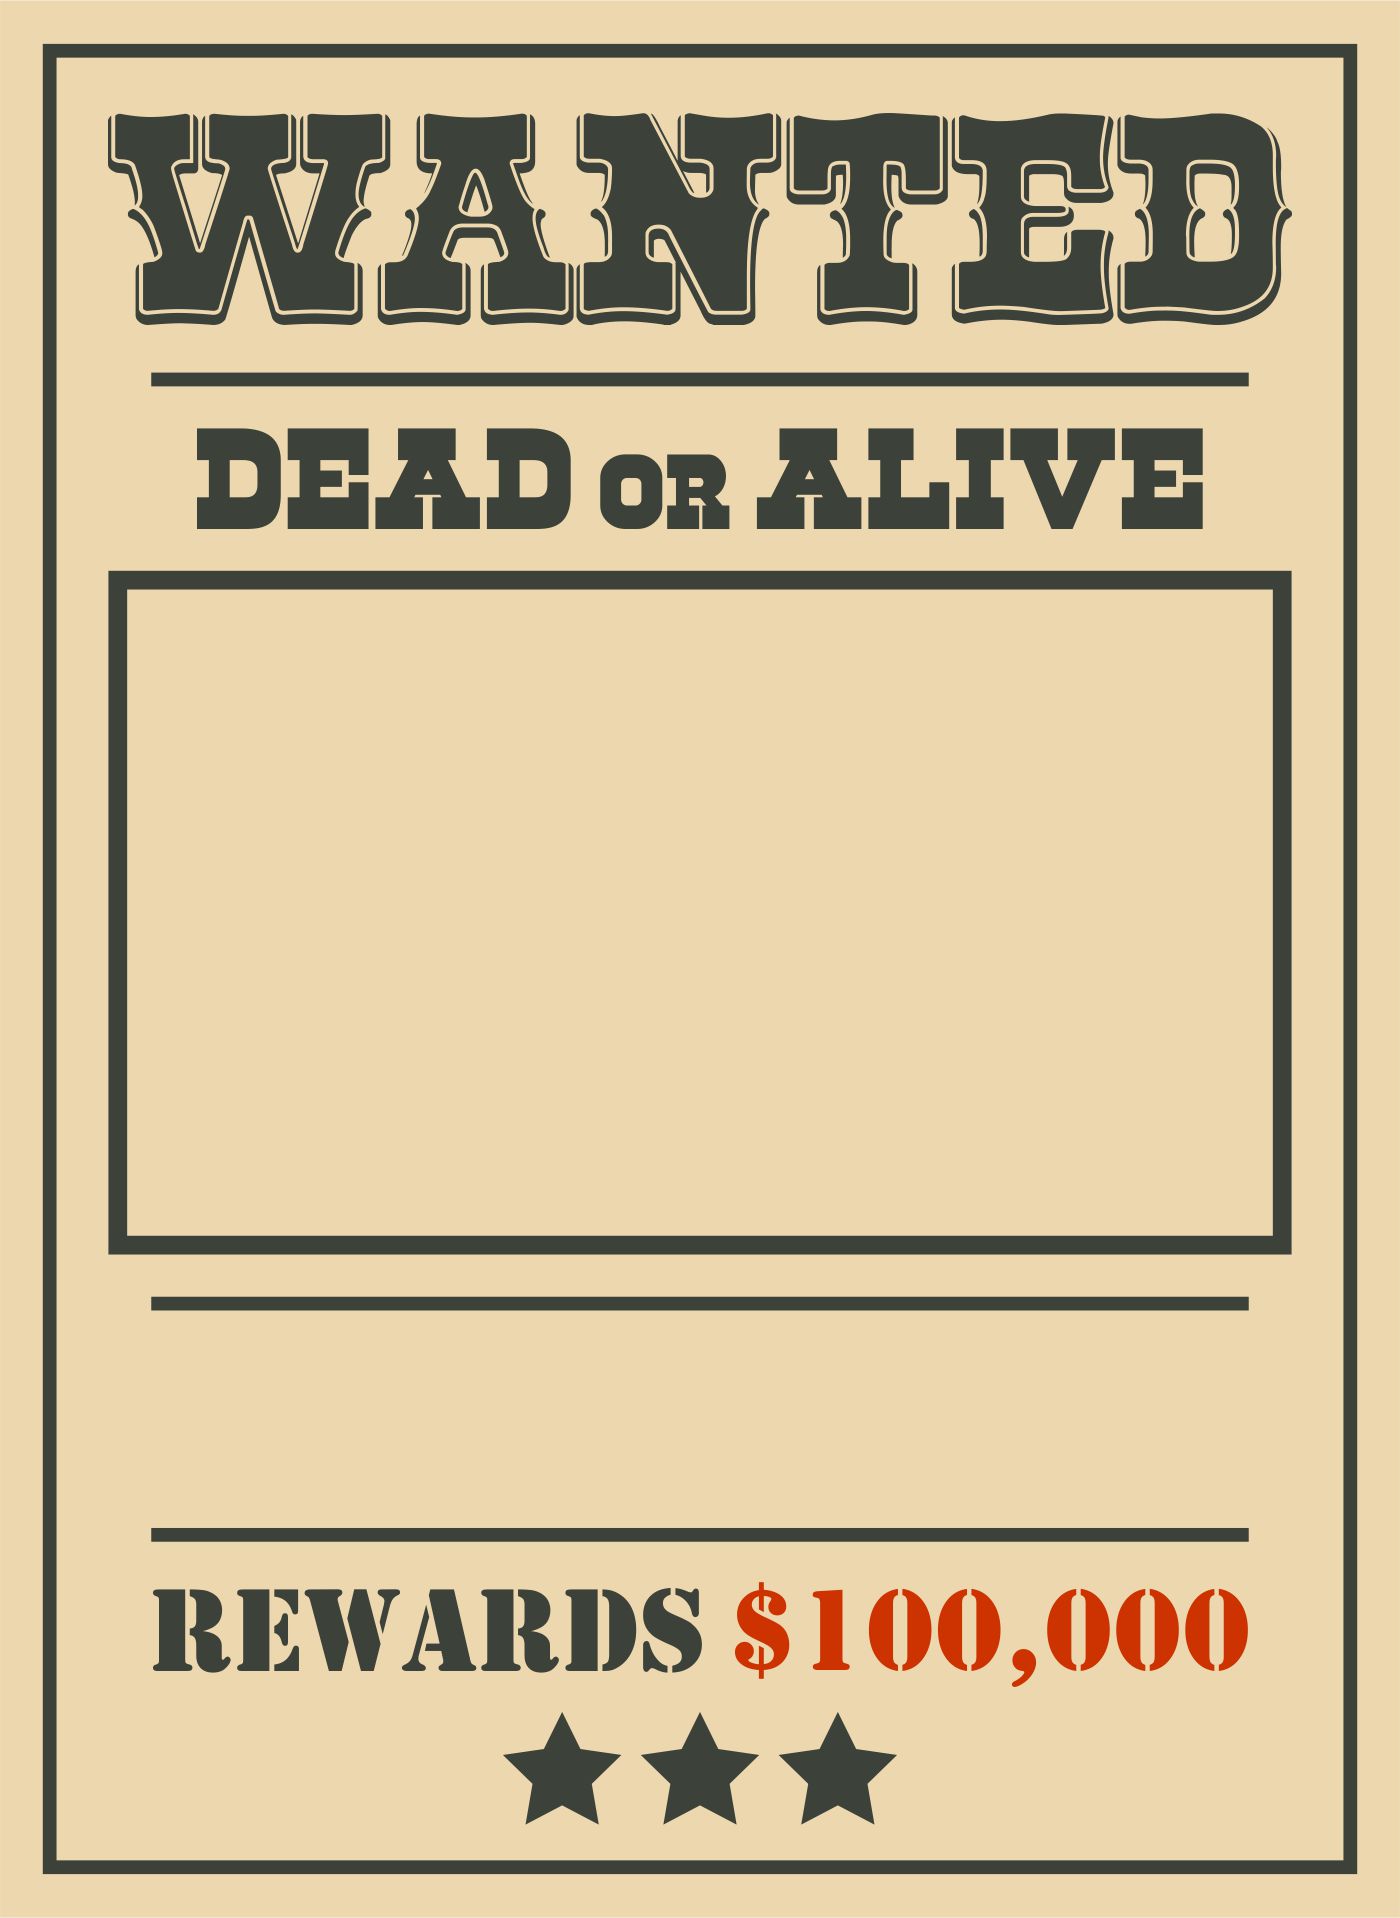 7 Best Images of Old West Wanted Posters Printable - Old West Wanted